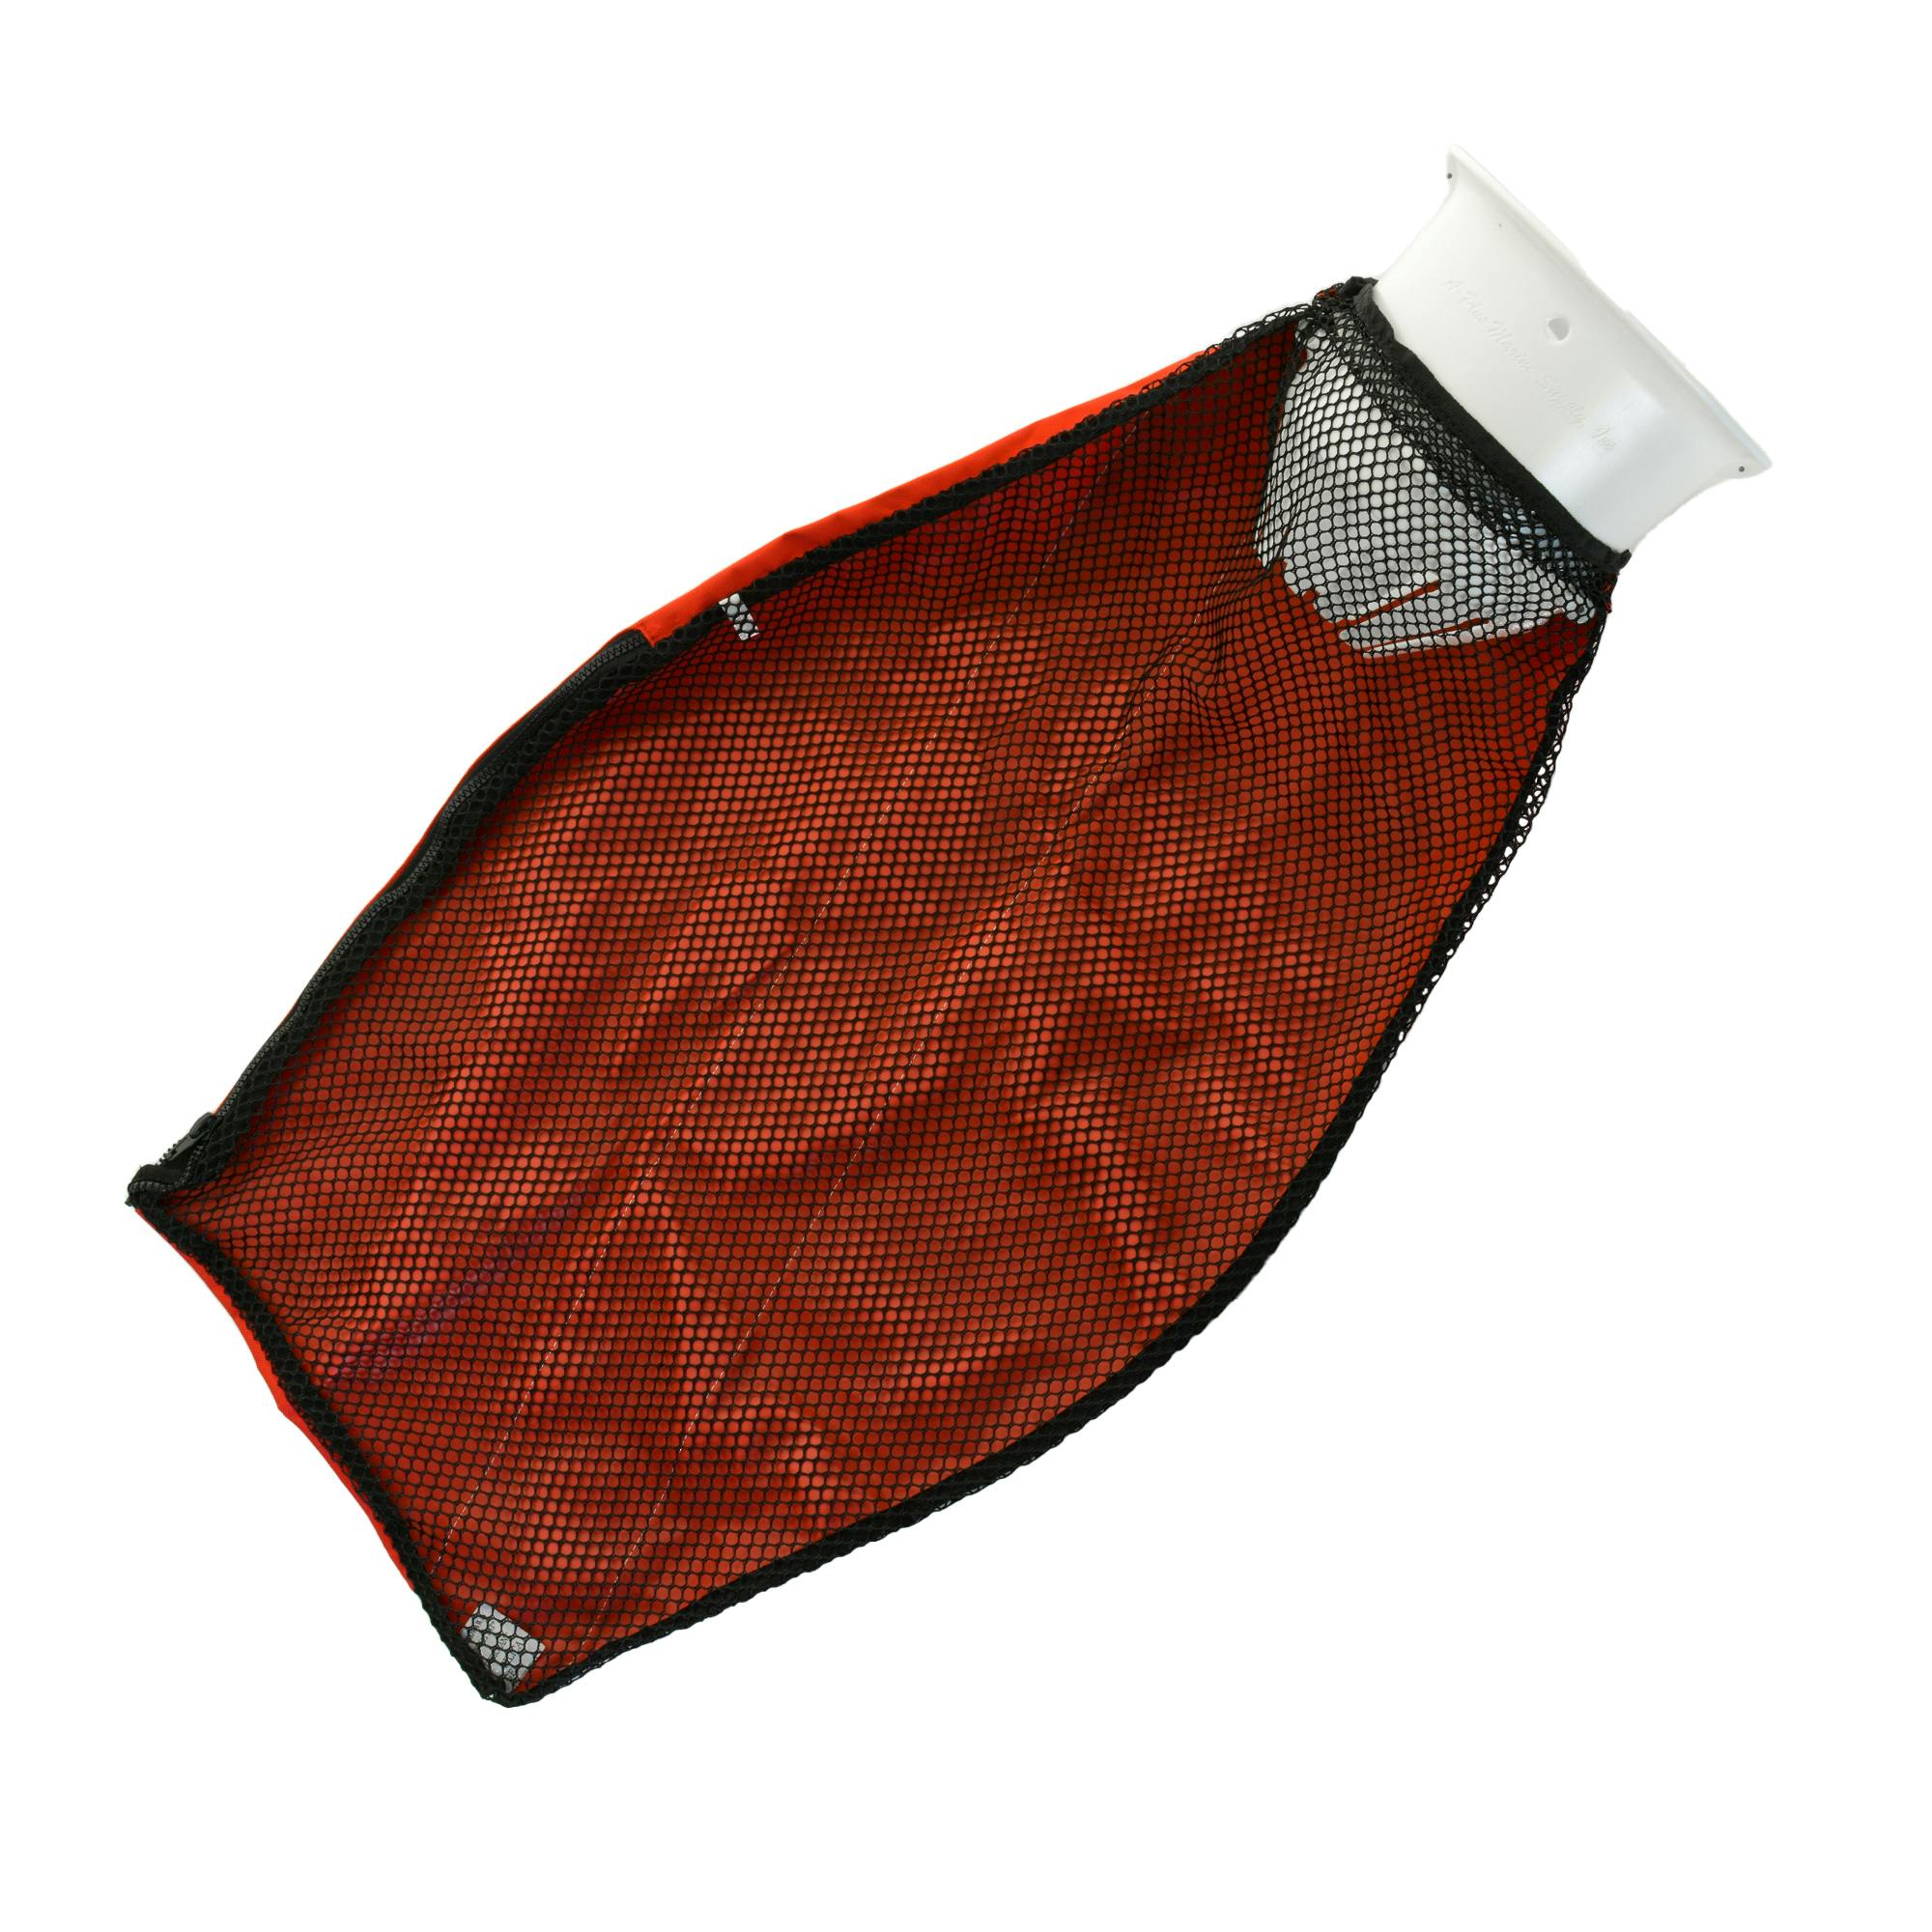 Deluxe Dive Flag Lobster Catch Bag with Side Zipper Mesh Side